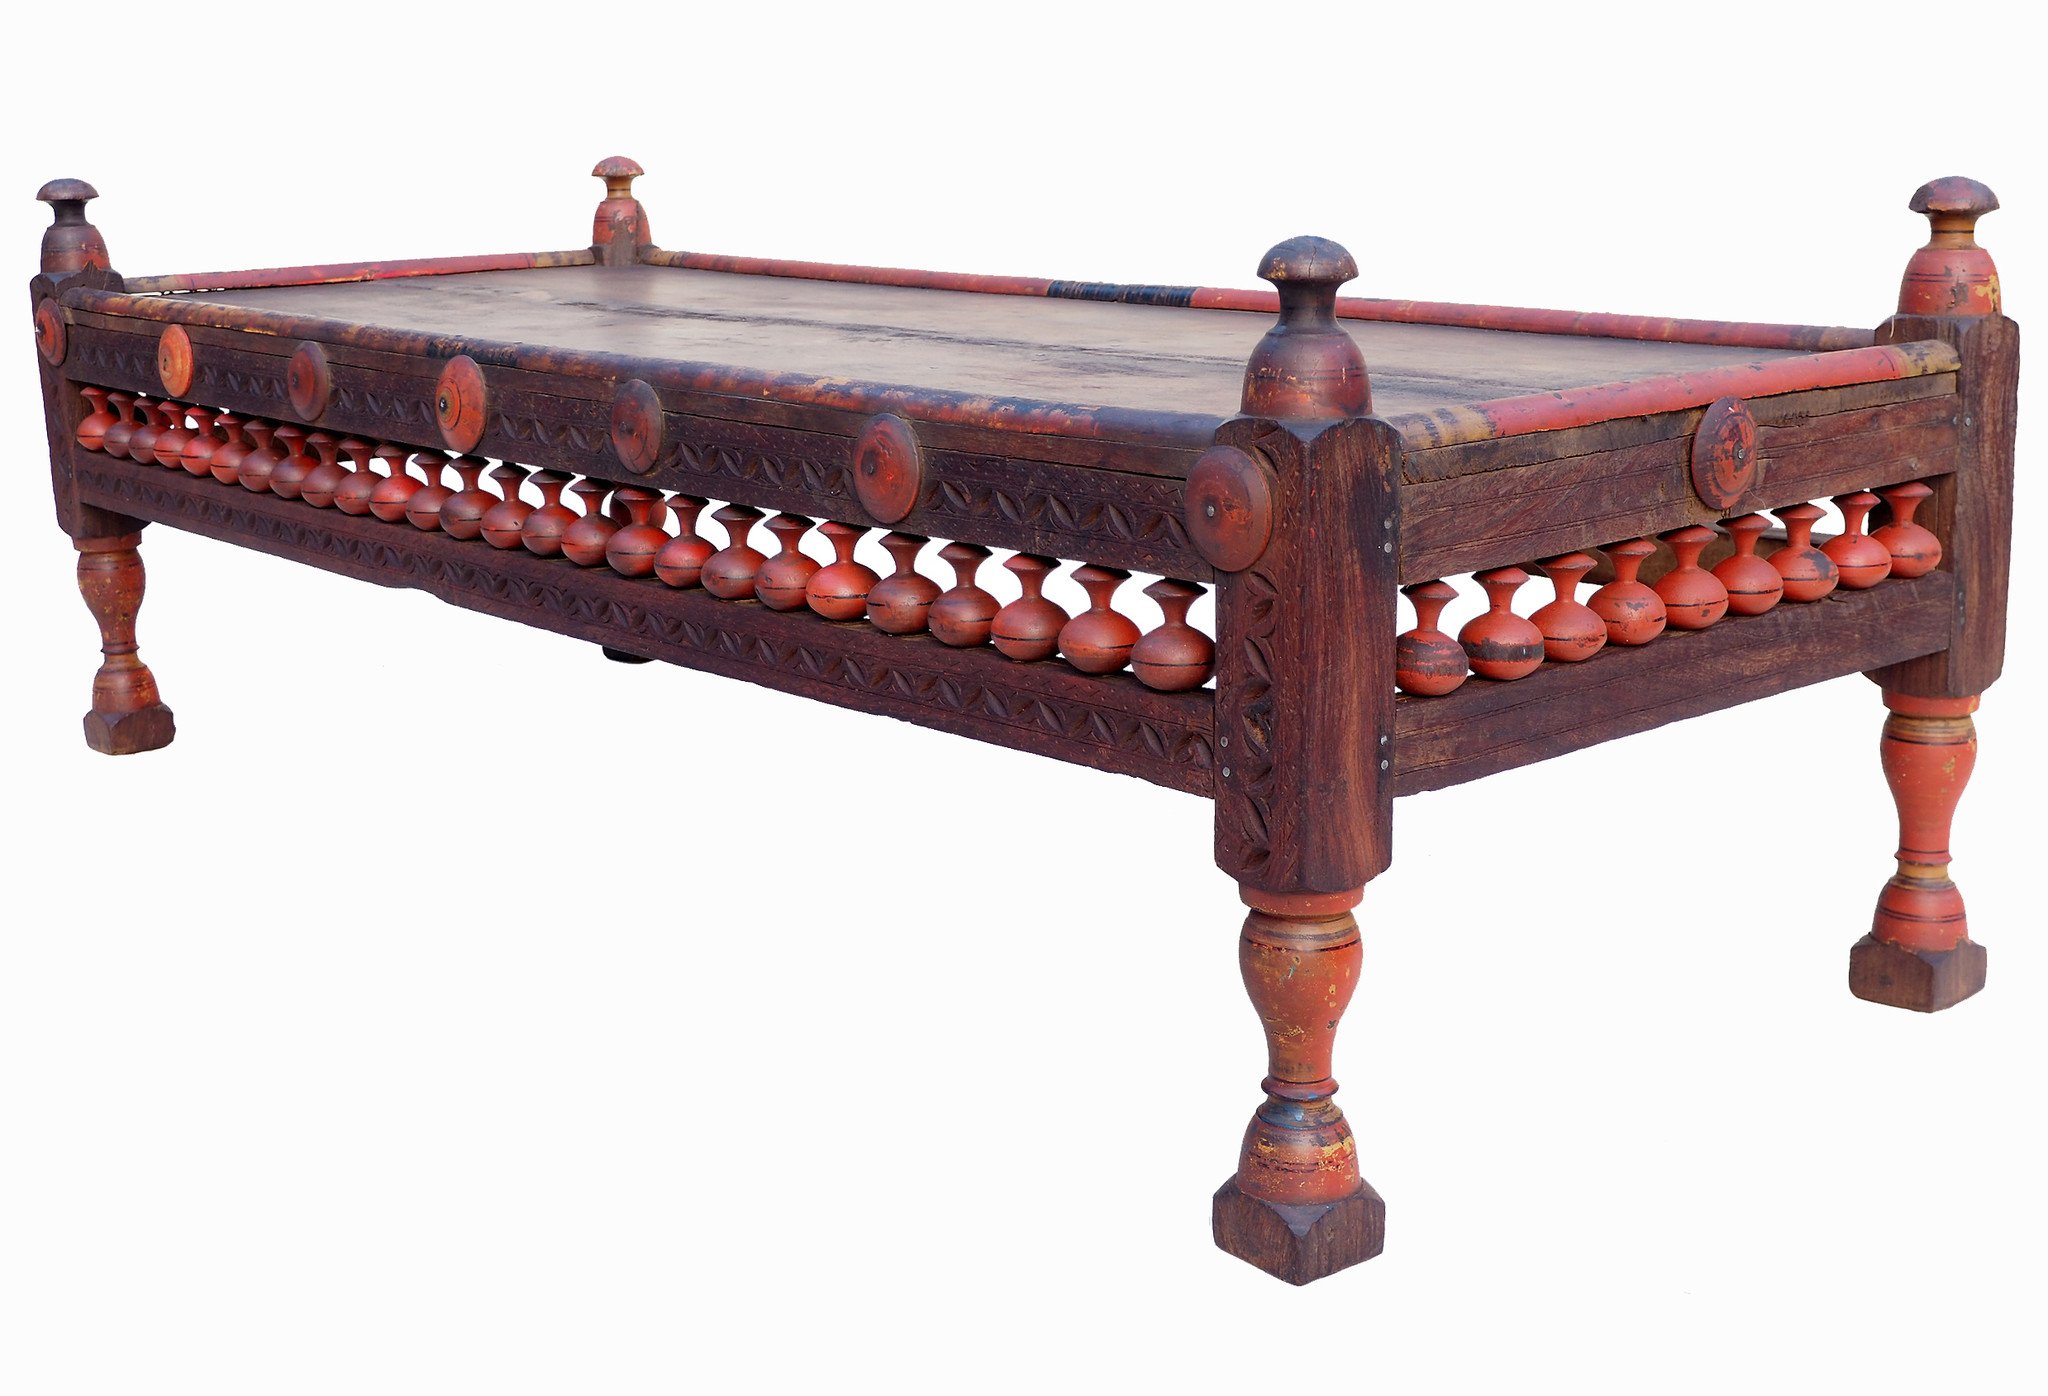 153x60 cm rare Antique solid wood orient tea table sidtable coffee table living room table from Afghanistan Pakistan WL/PJ/E